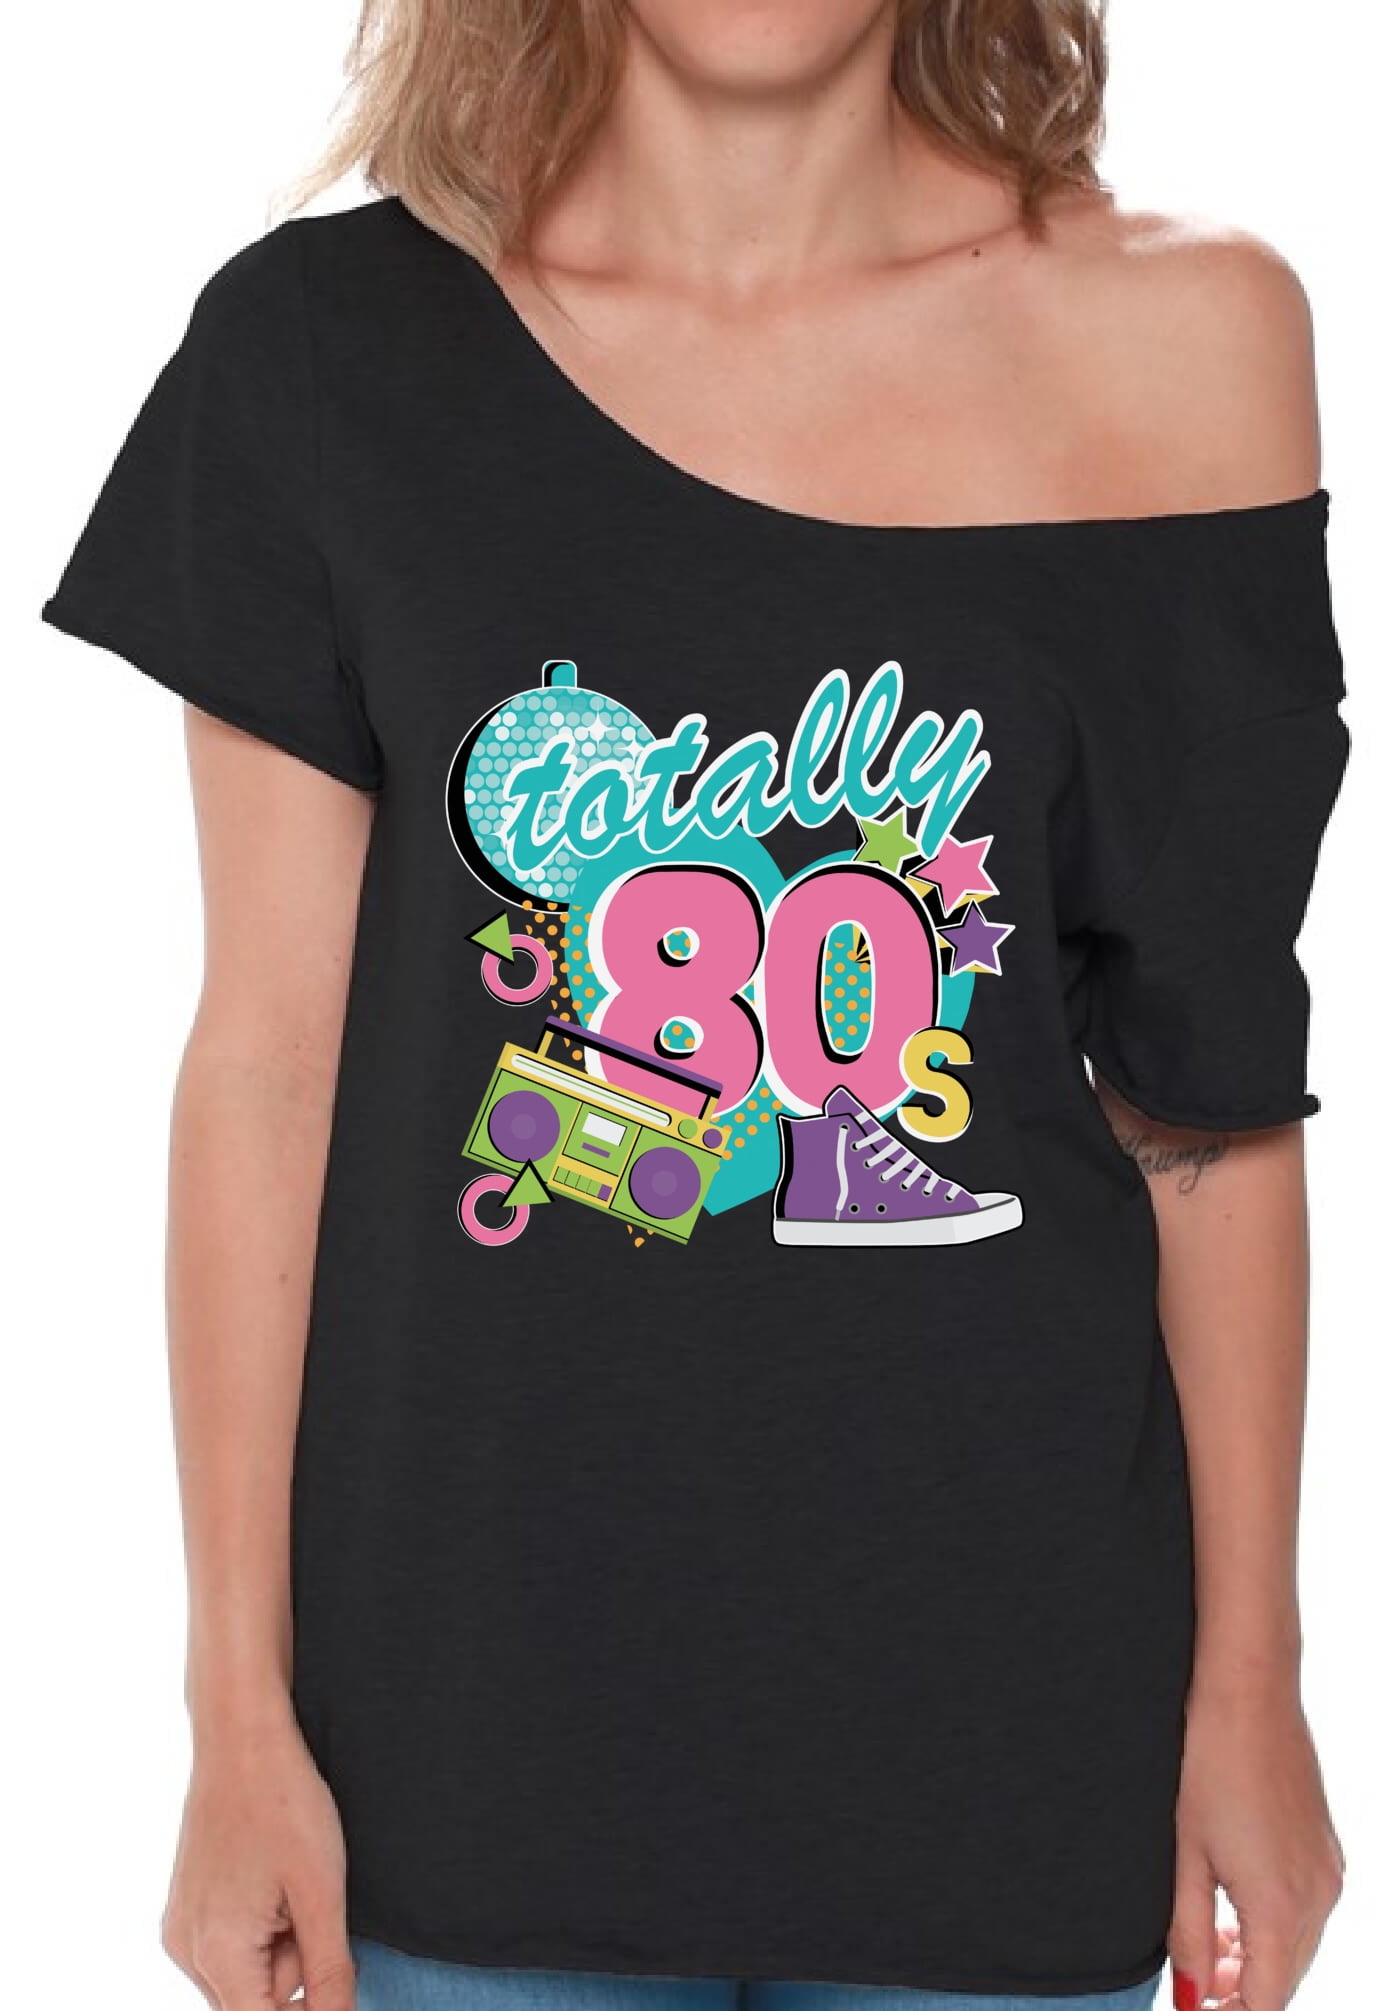 Sympatisere Beskrivelse Vag Costume 80's Clothes for Women Totally 80's Off The Shoulder Shirt - S M L  XL 2XL 3XL - Retro Costume 80s Graphic Tee - Walmart.com